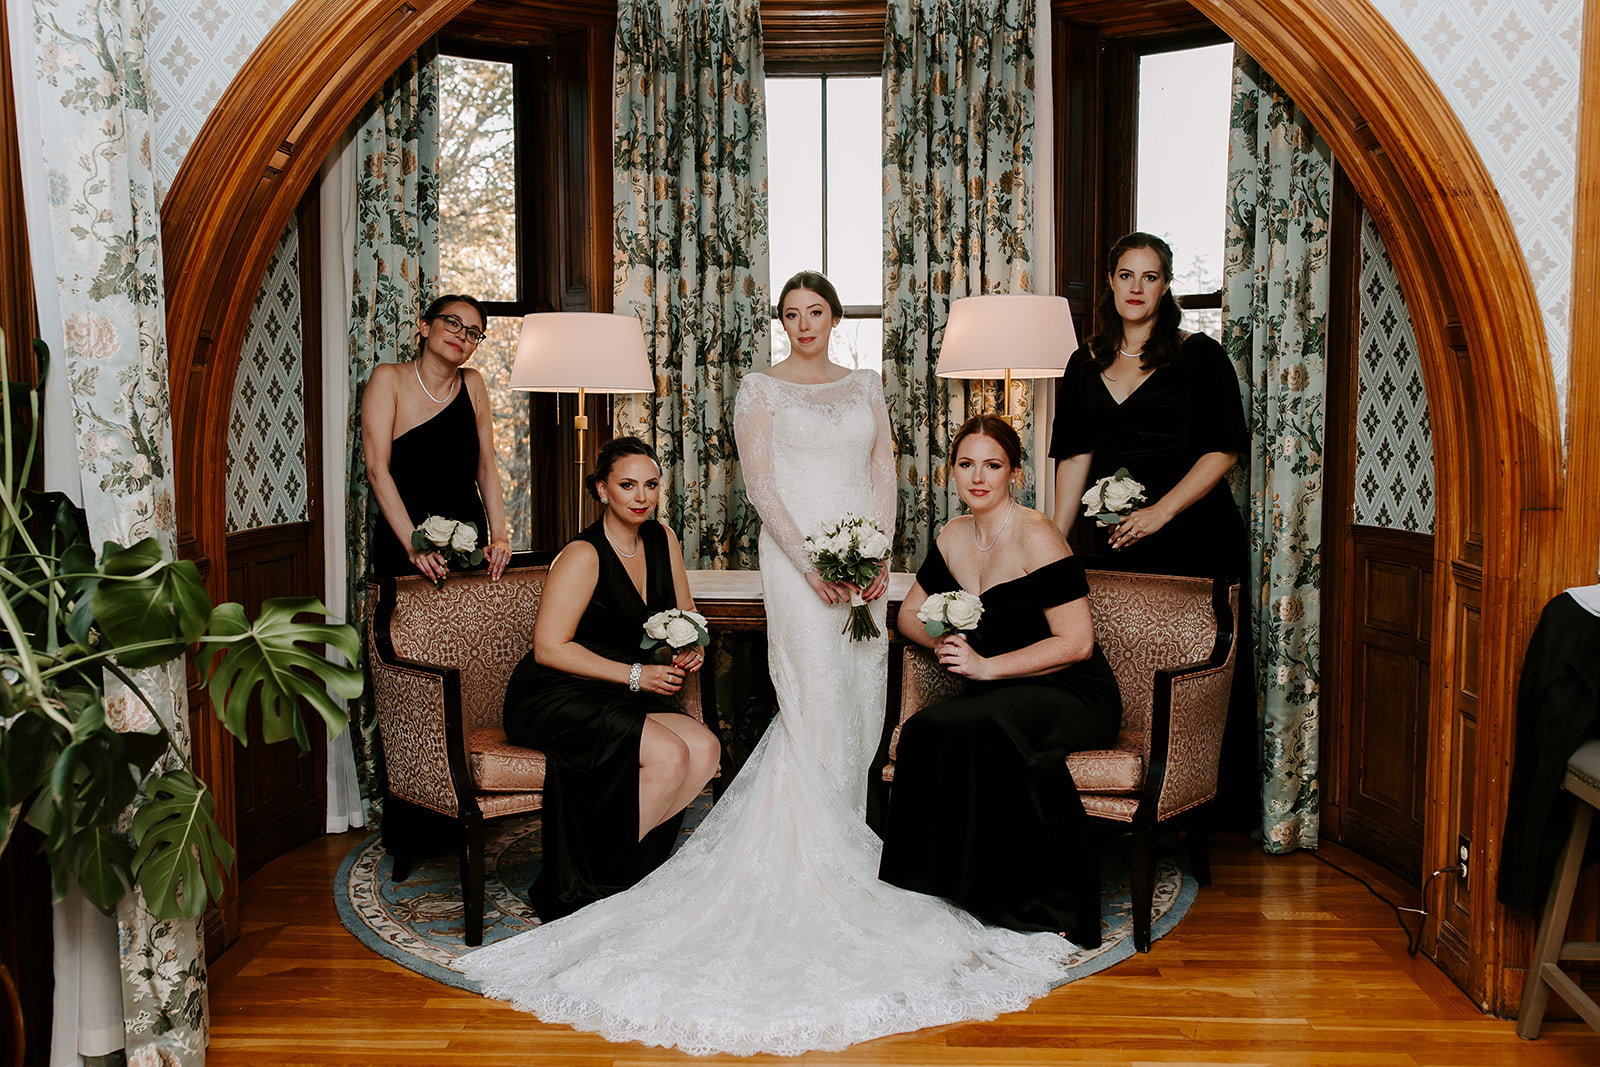 Bridesmaids pose together before the stunning Stevens estate wedding day